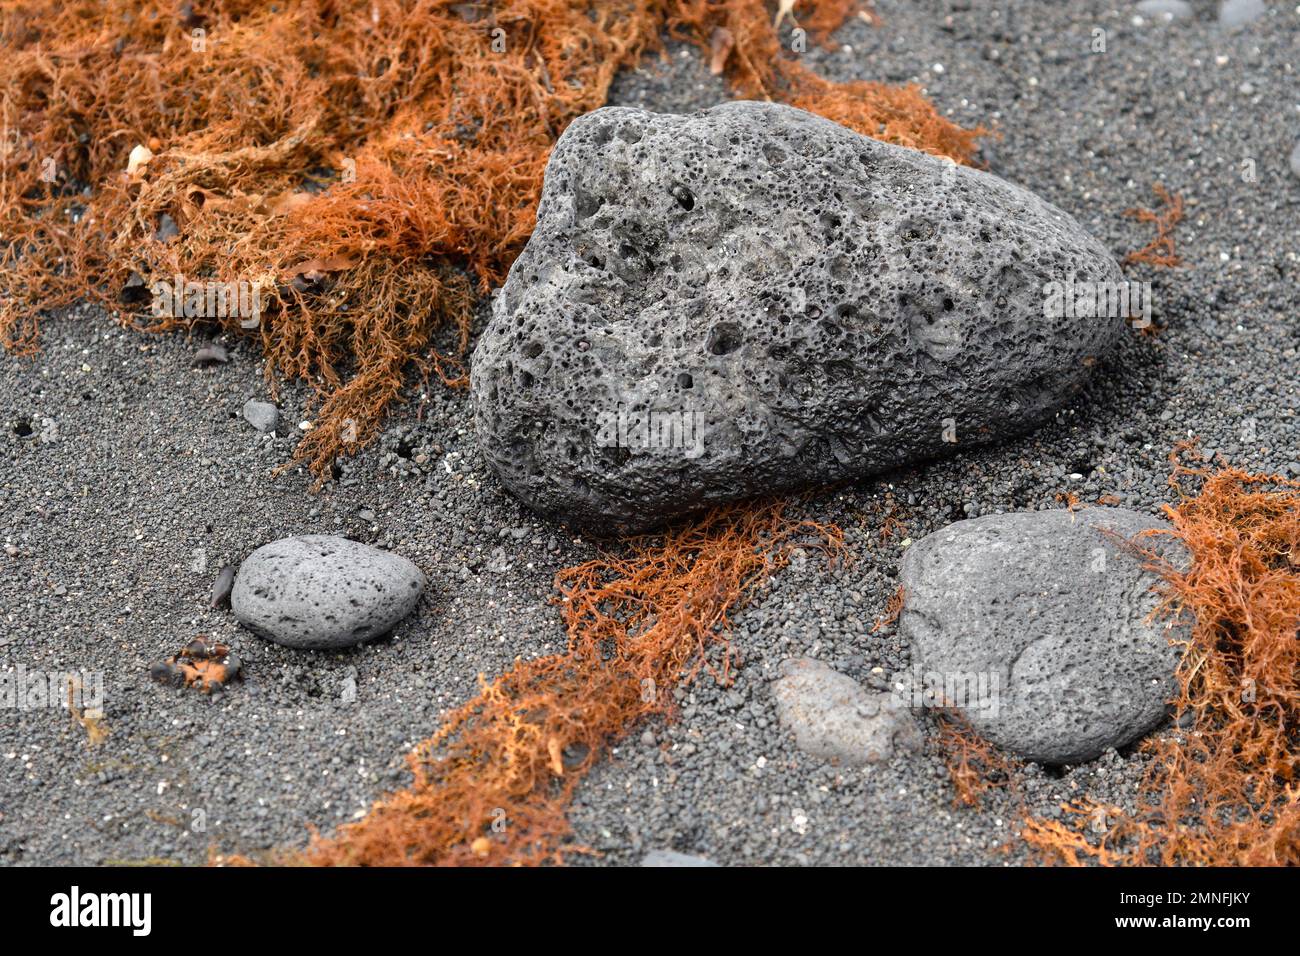 Seaweed among the gravel and volcanic rock eroded by the sea at Playa de las Malvas in Lanzarote Stock Photo